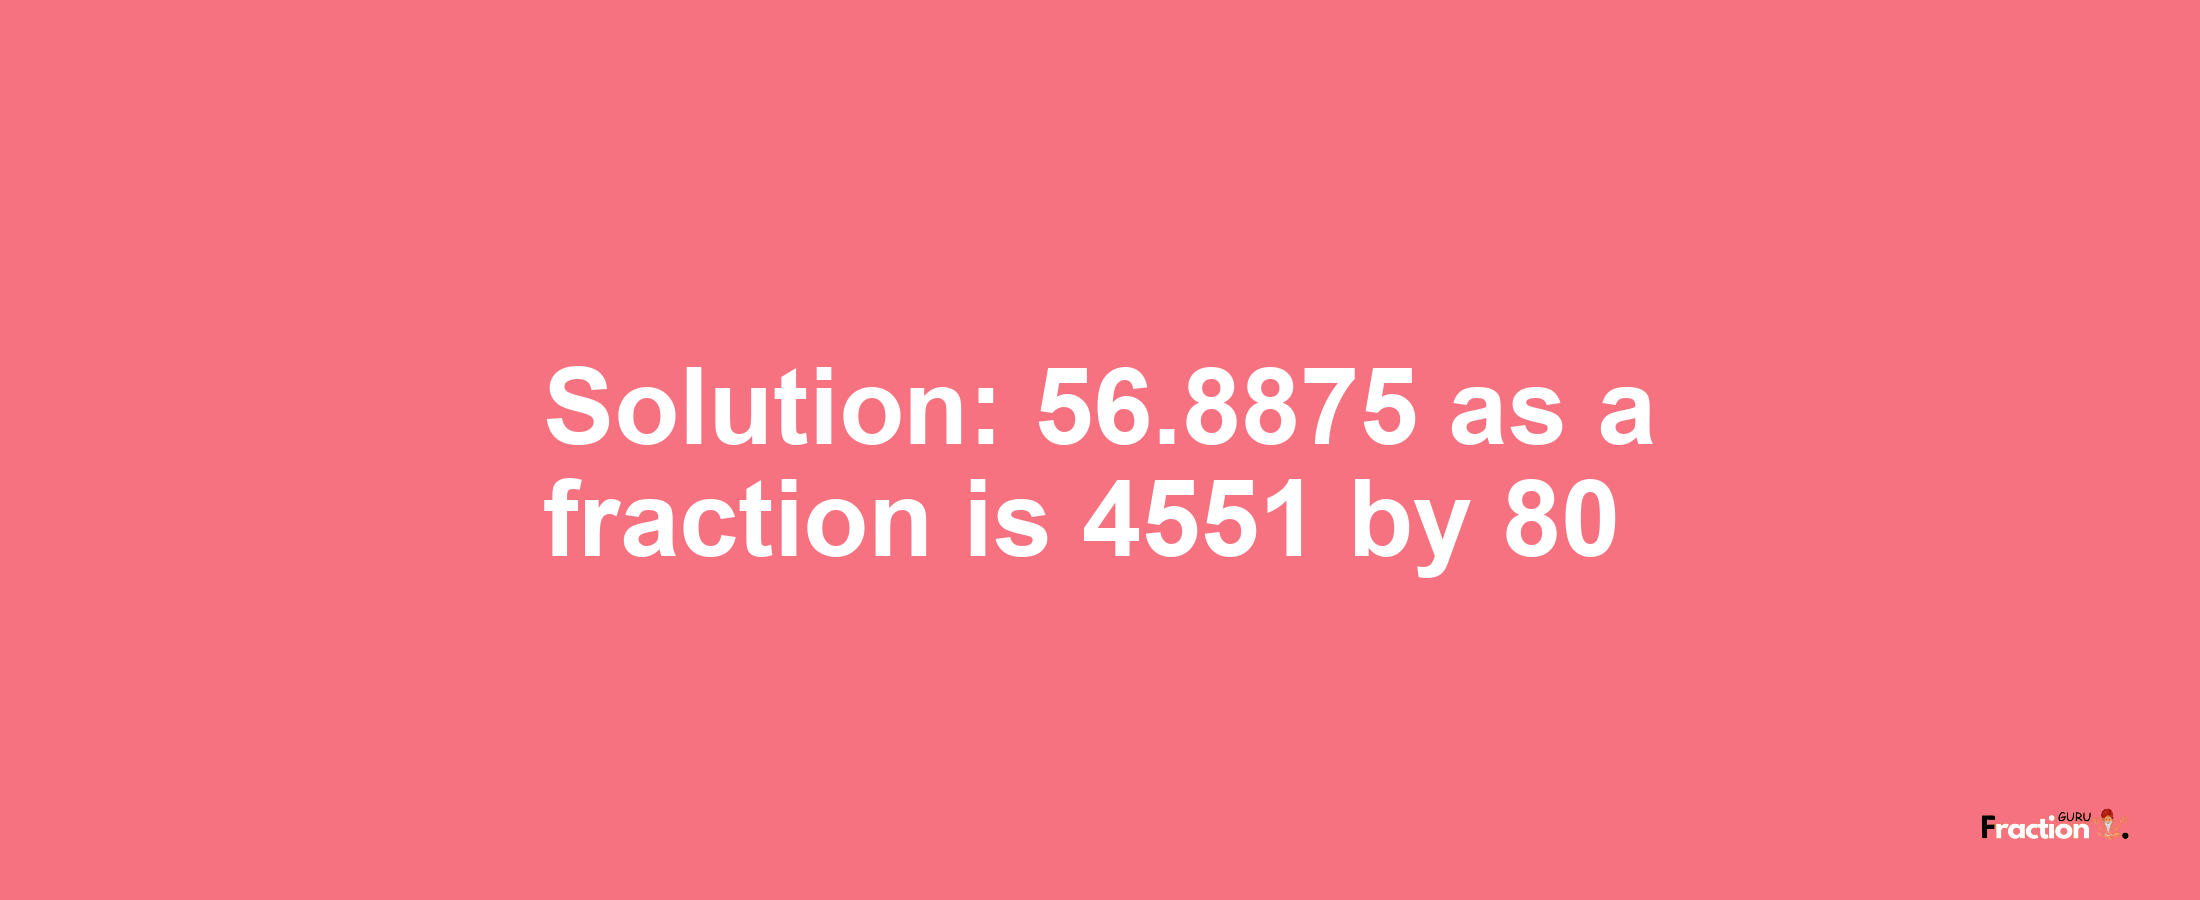 Solution:56.8875 as a fraction is 4551/80